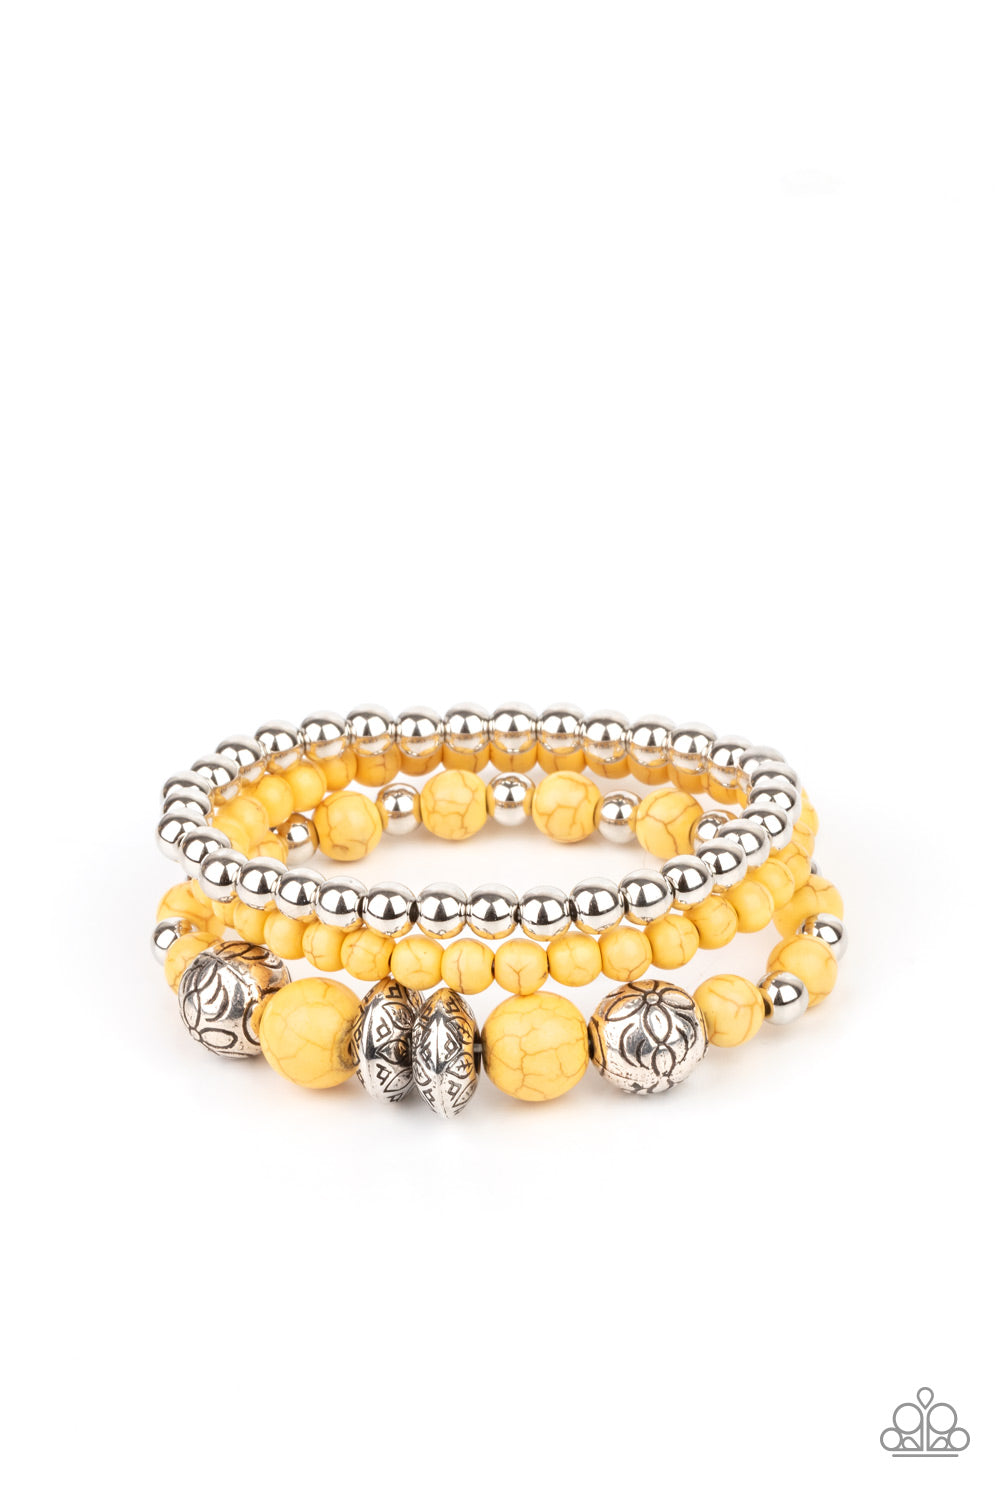 &lt;P&gt;A whimsically mismatched collection of yellow stone beads, plain silver beads, and antiqued floral accents are threaded along stretchy bands around the wrist, creating colorful layers. &lt;/P&gt;

&lt;P&gt;&lt;I&gt; Sold as one individual bracelet.&lt;/I&gt;&lt;/p&gt;


&lt;img src=\&quot;https://d9b54x484lq62.cloudfront.net/paparazzi/shopping/images/517_tag150x115_1.png\&quot; alt=\&quot;New Kit\&quot; align=\&quot;middle\&quot; height=\&quot;50\&quot; width=\&quot;50\&quot;/&gt;